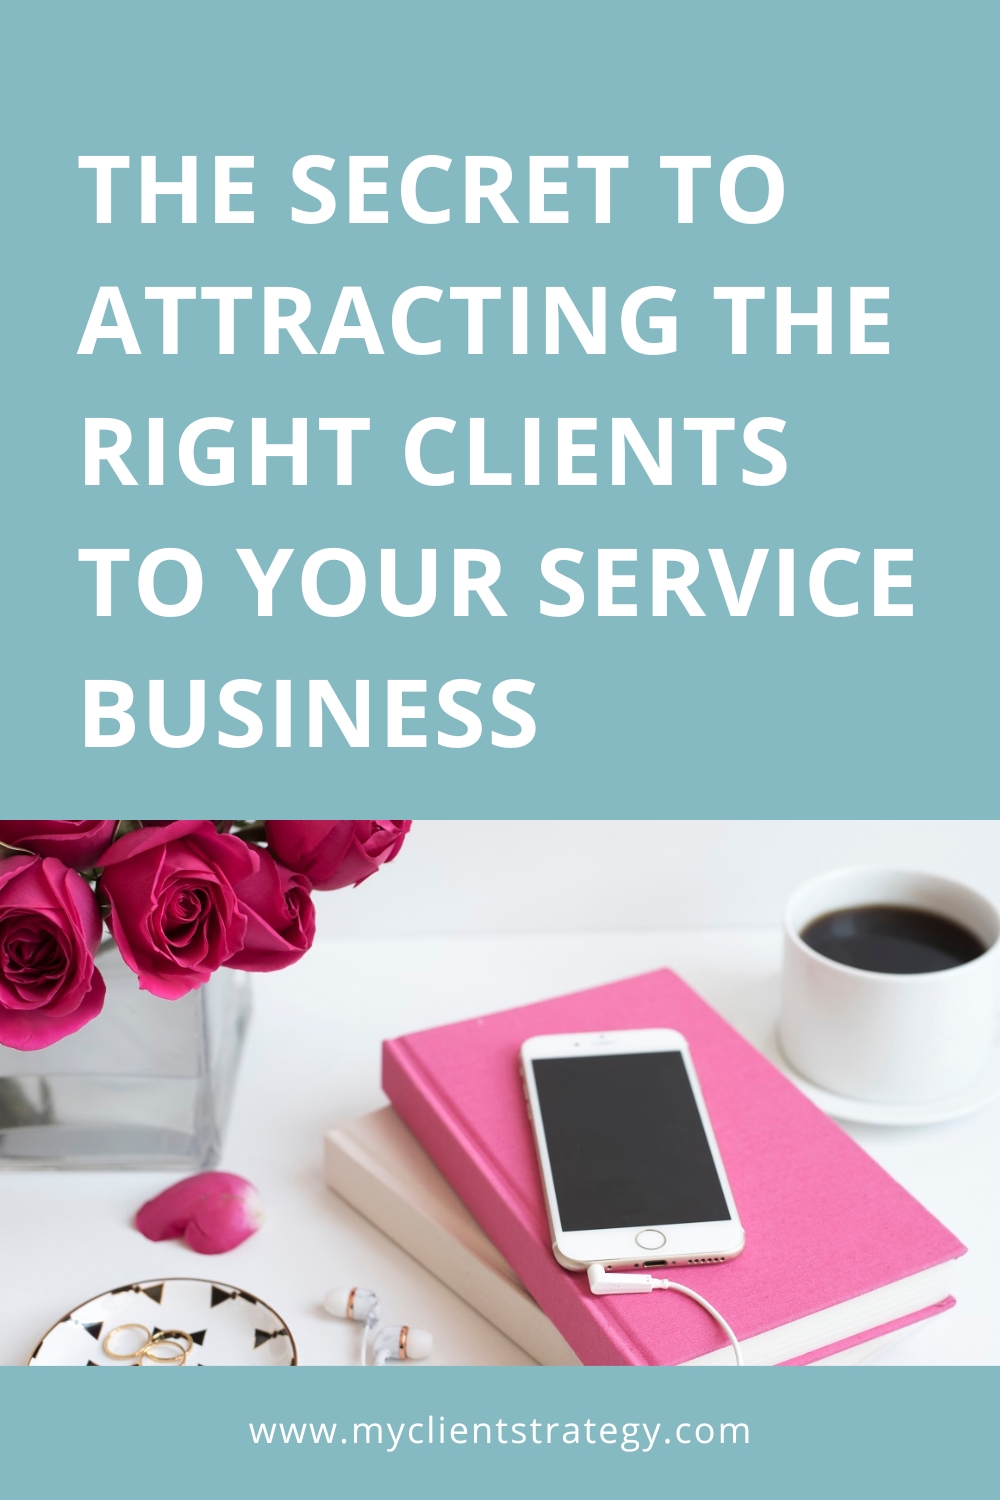 The secret to attracting the right clients to your service business